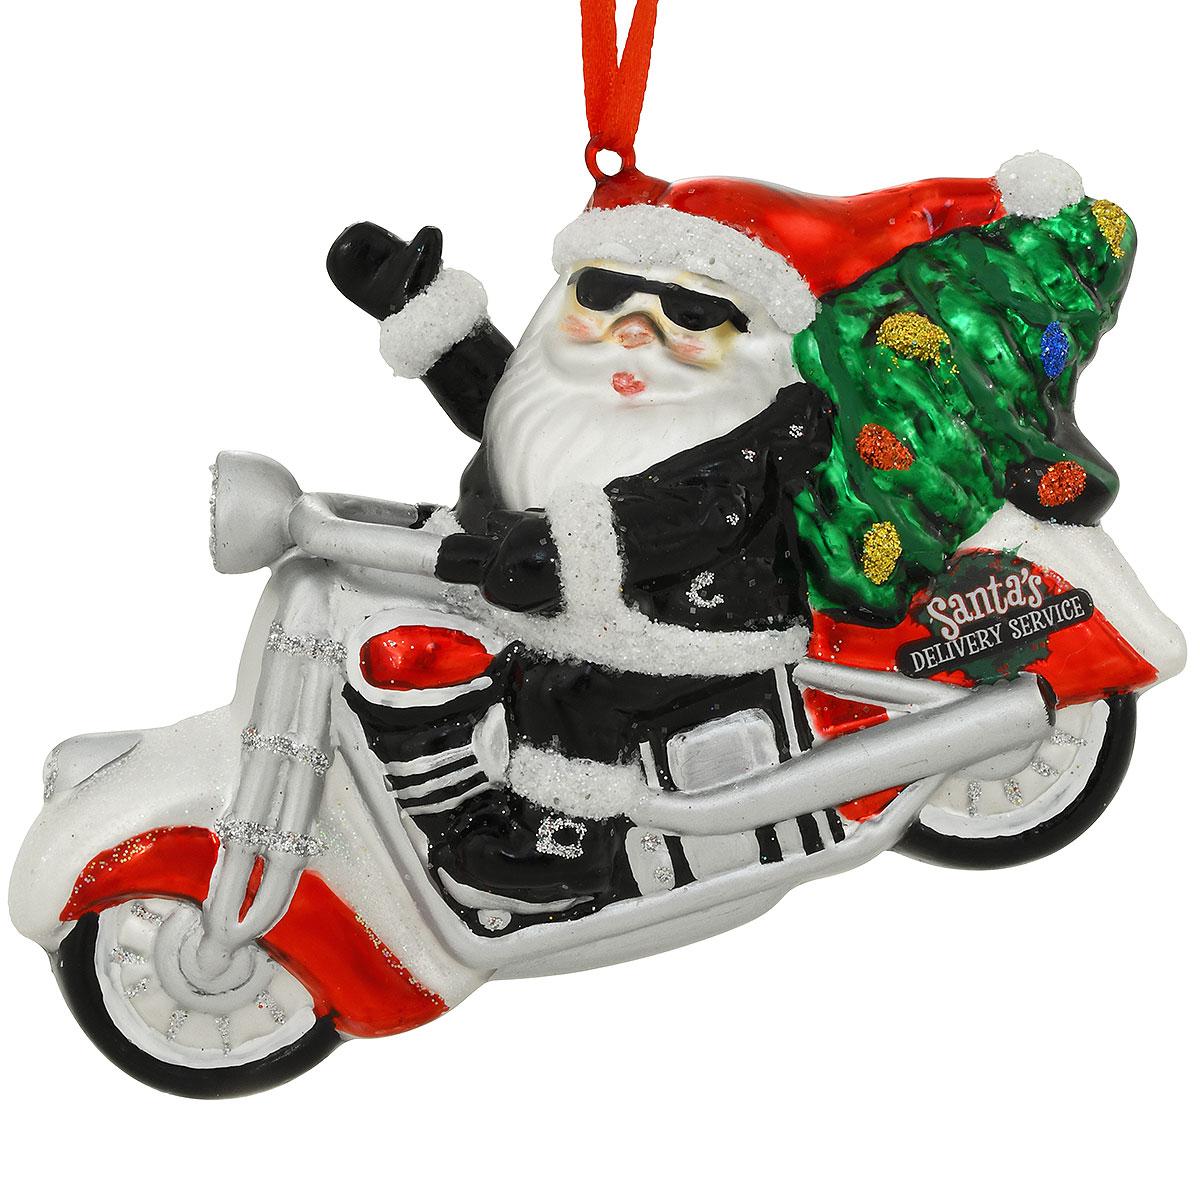 Santa Claus on a Motorcycle Glass Christmas Ornament